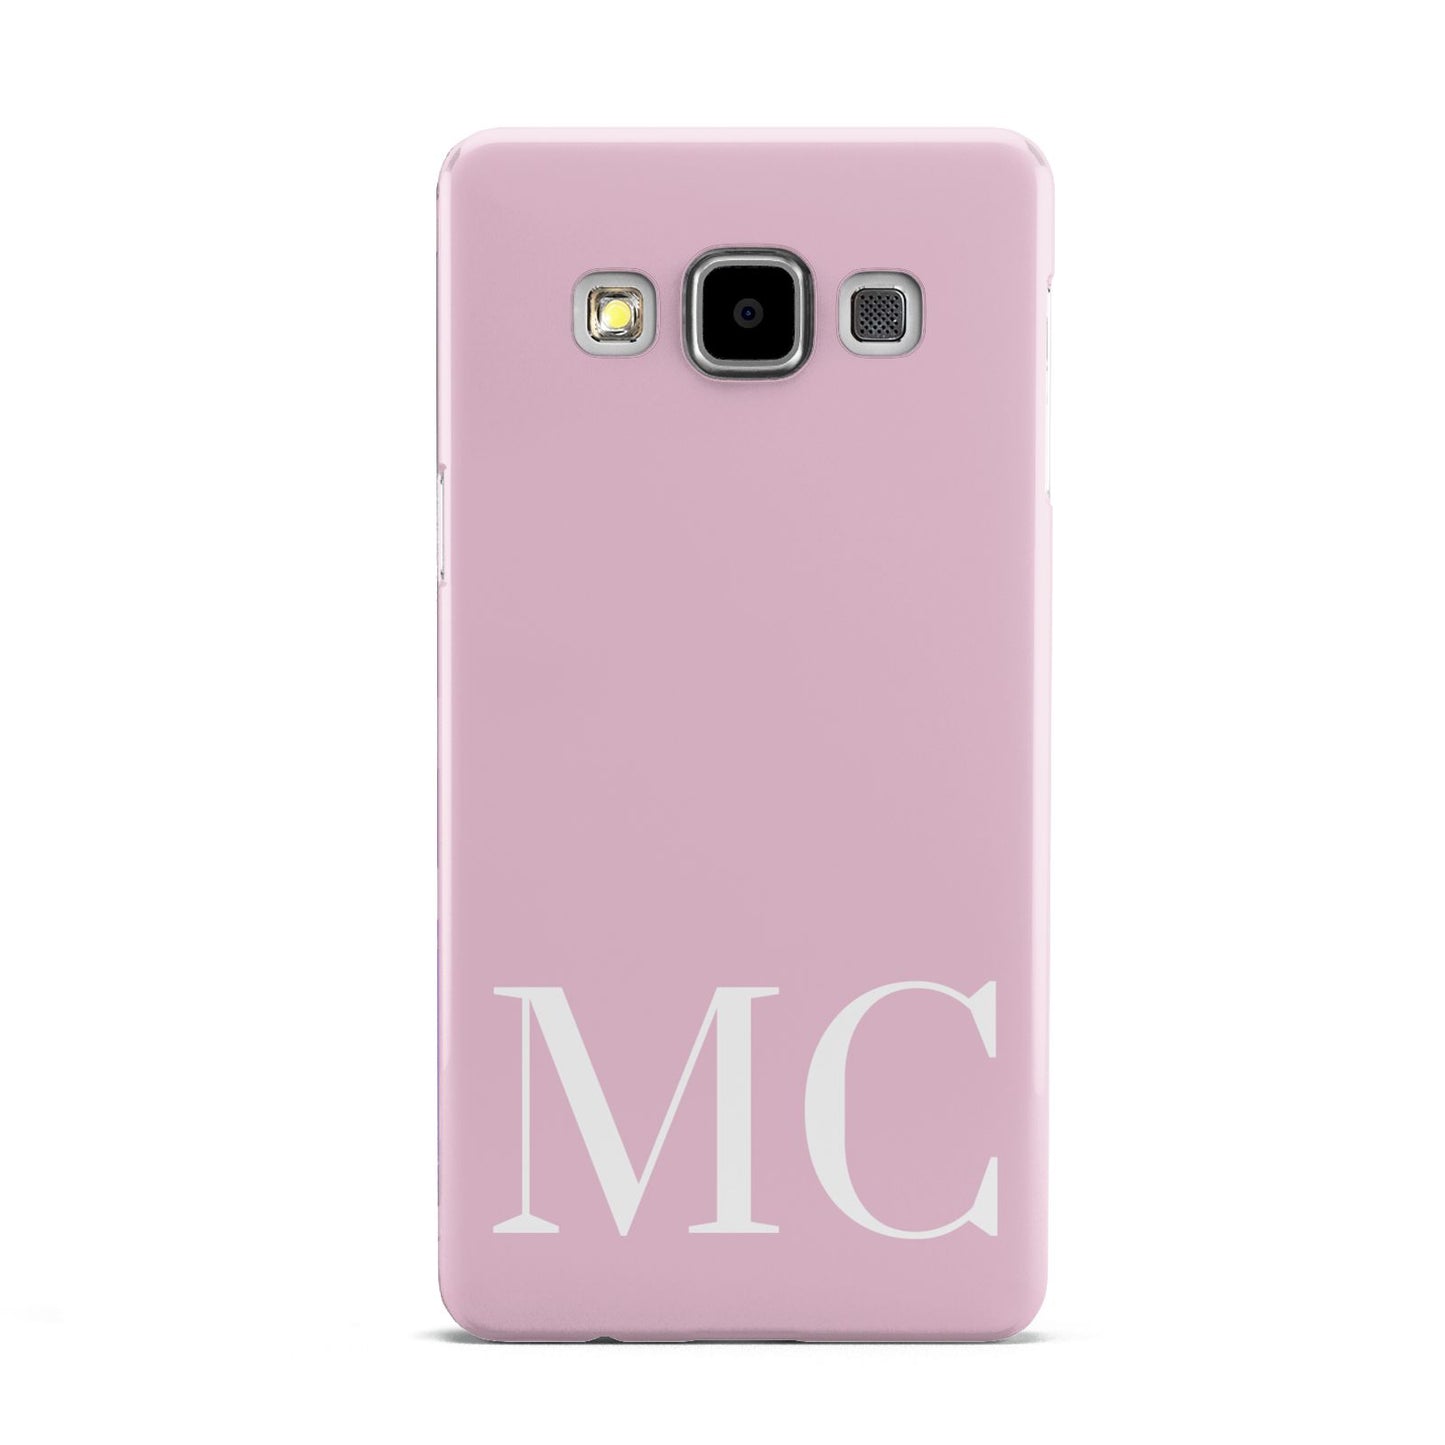 Initials Personalised 2 Samsung Galaxy A5 Case